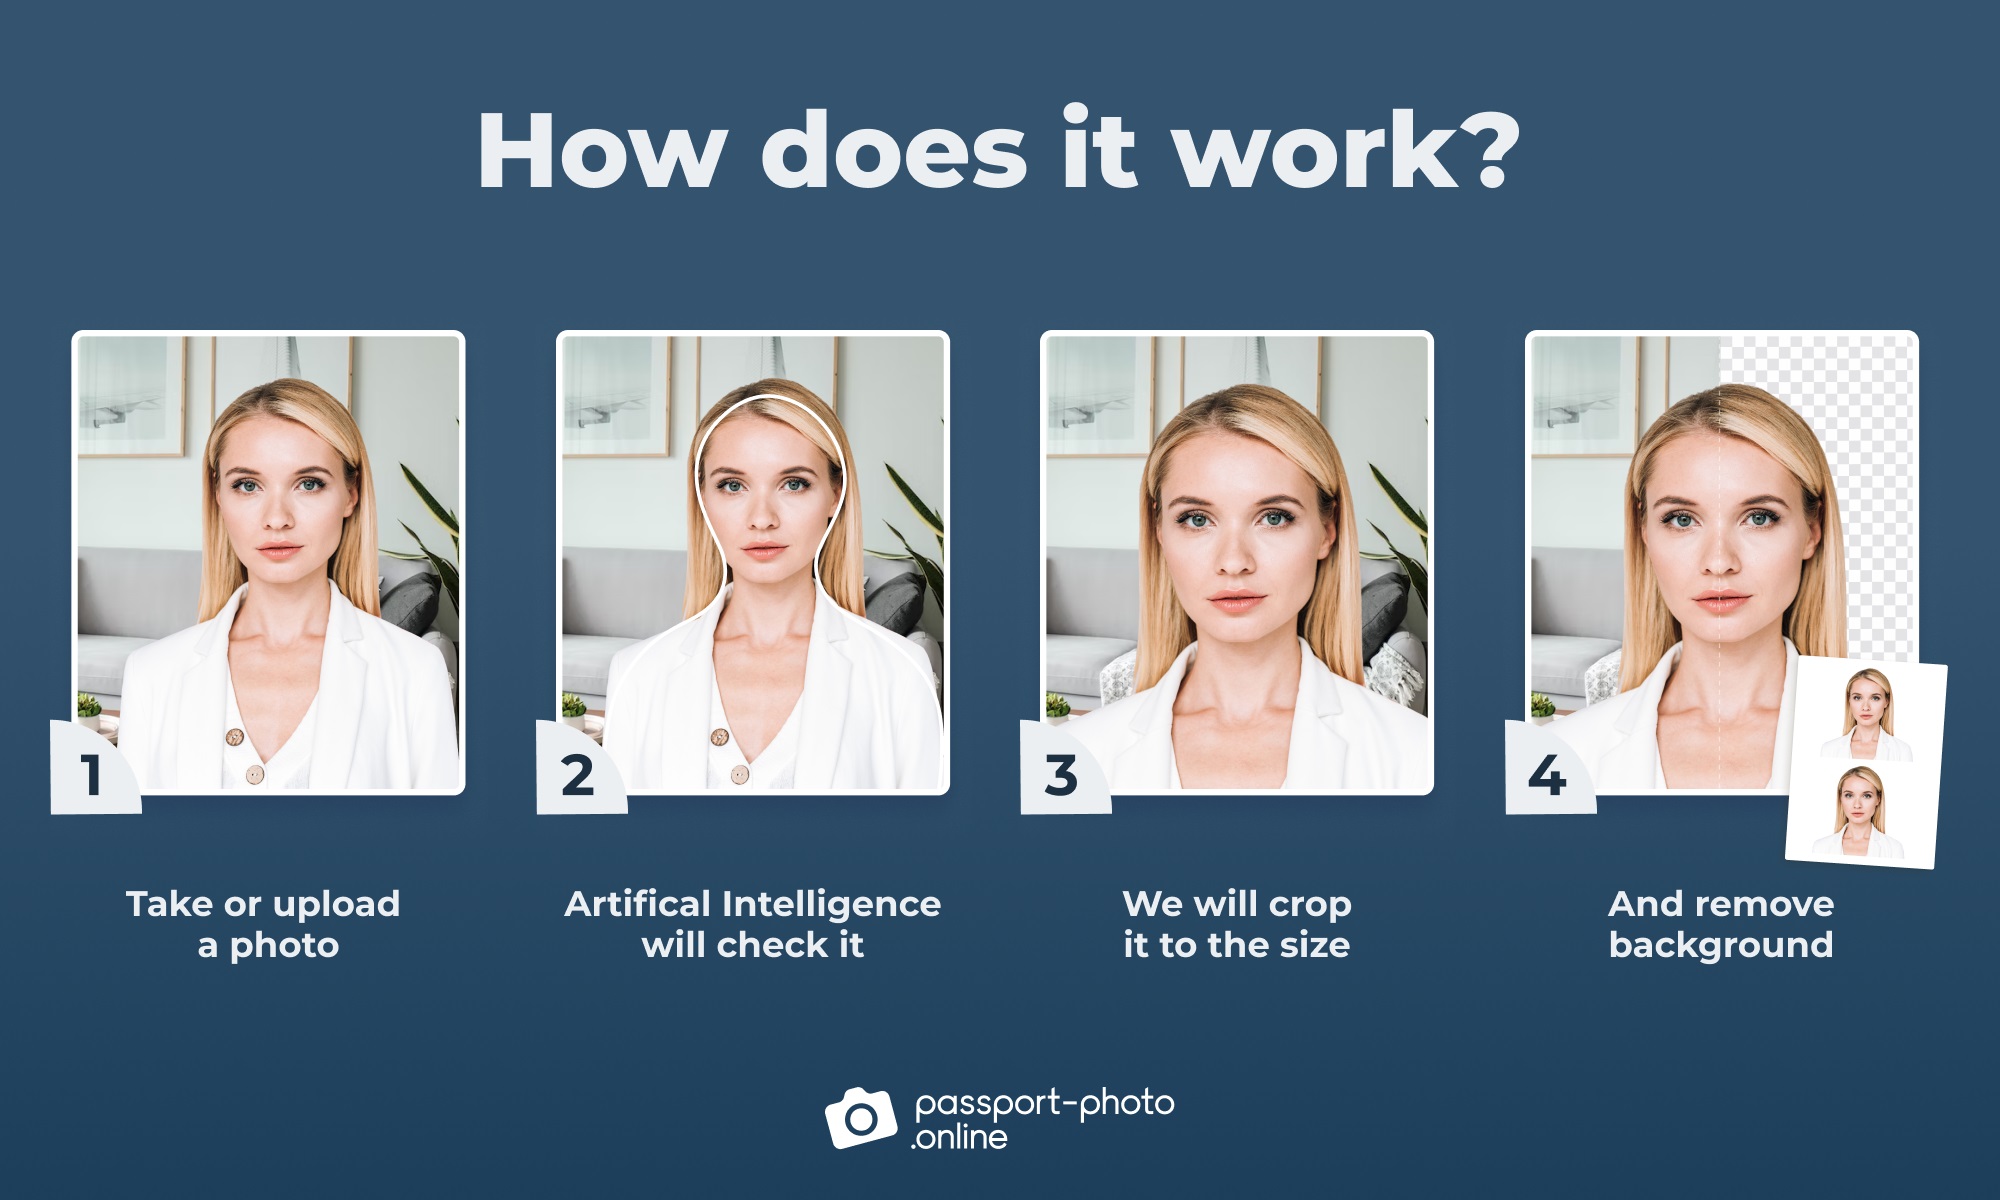 A 4-step process representing the process of creating passport photos with Passport Photo Online.